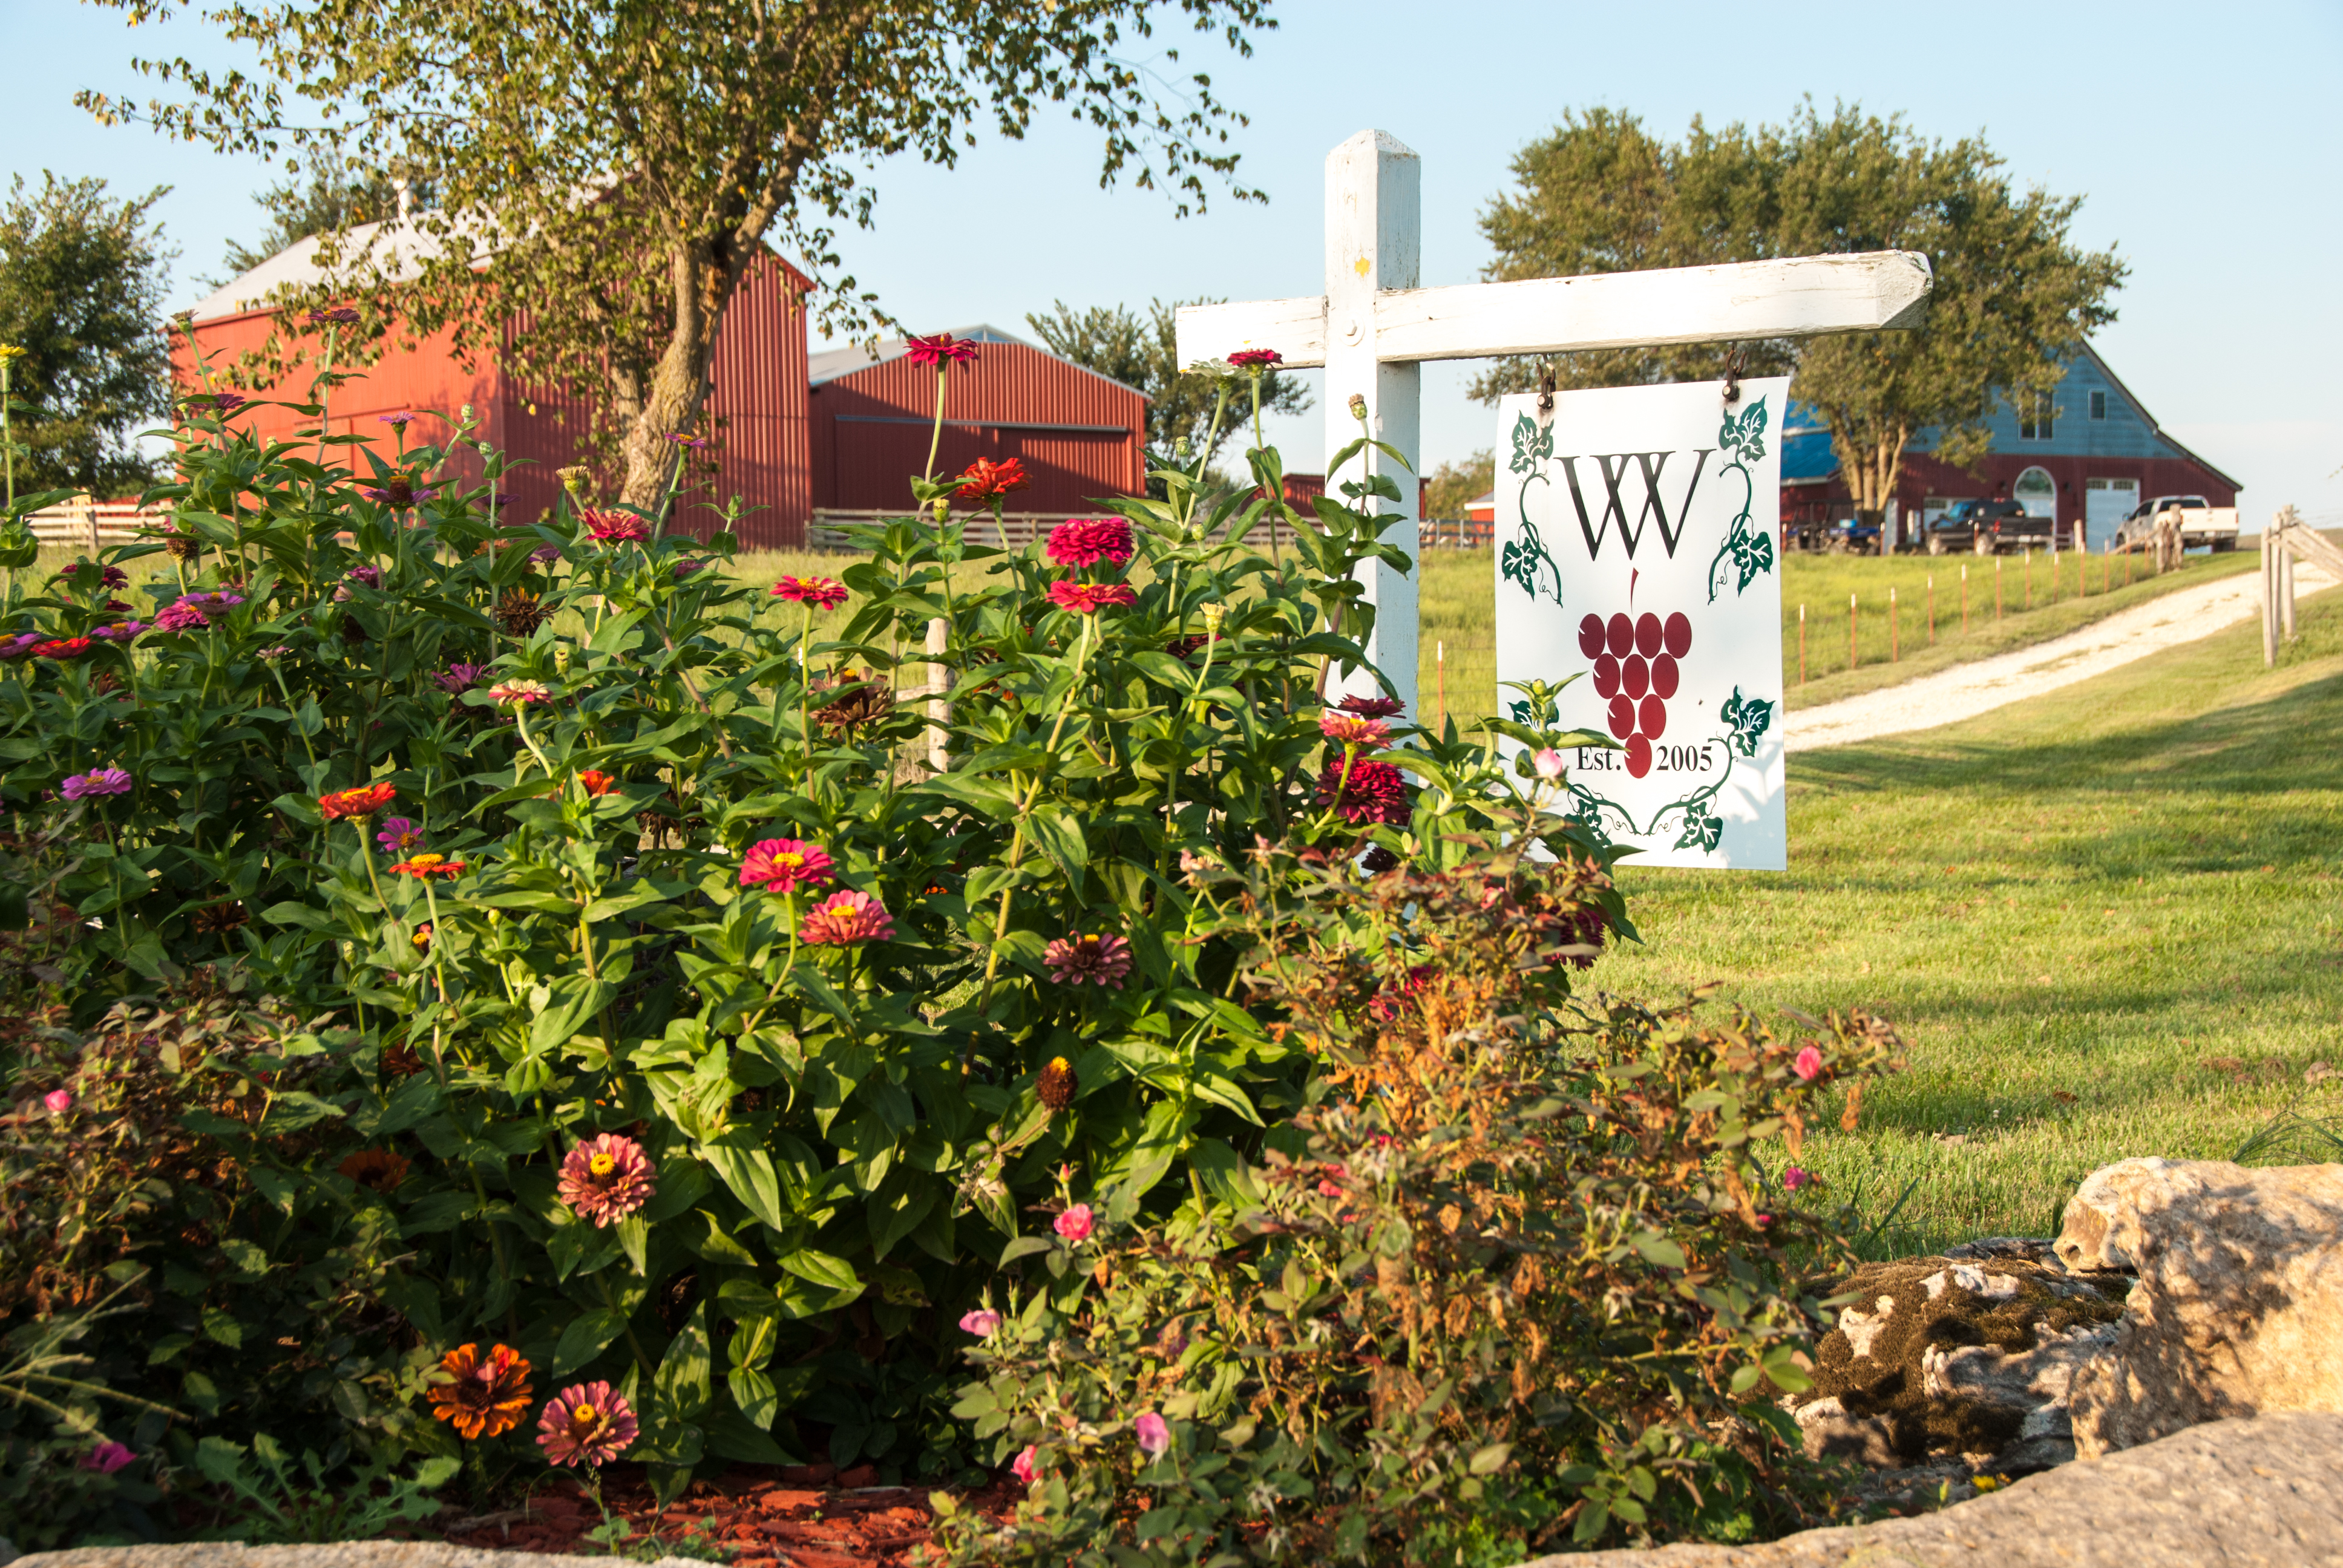 Westphalia Vineyards- A bed of flower bushes with the winery sign.